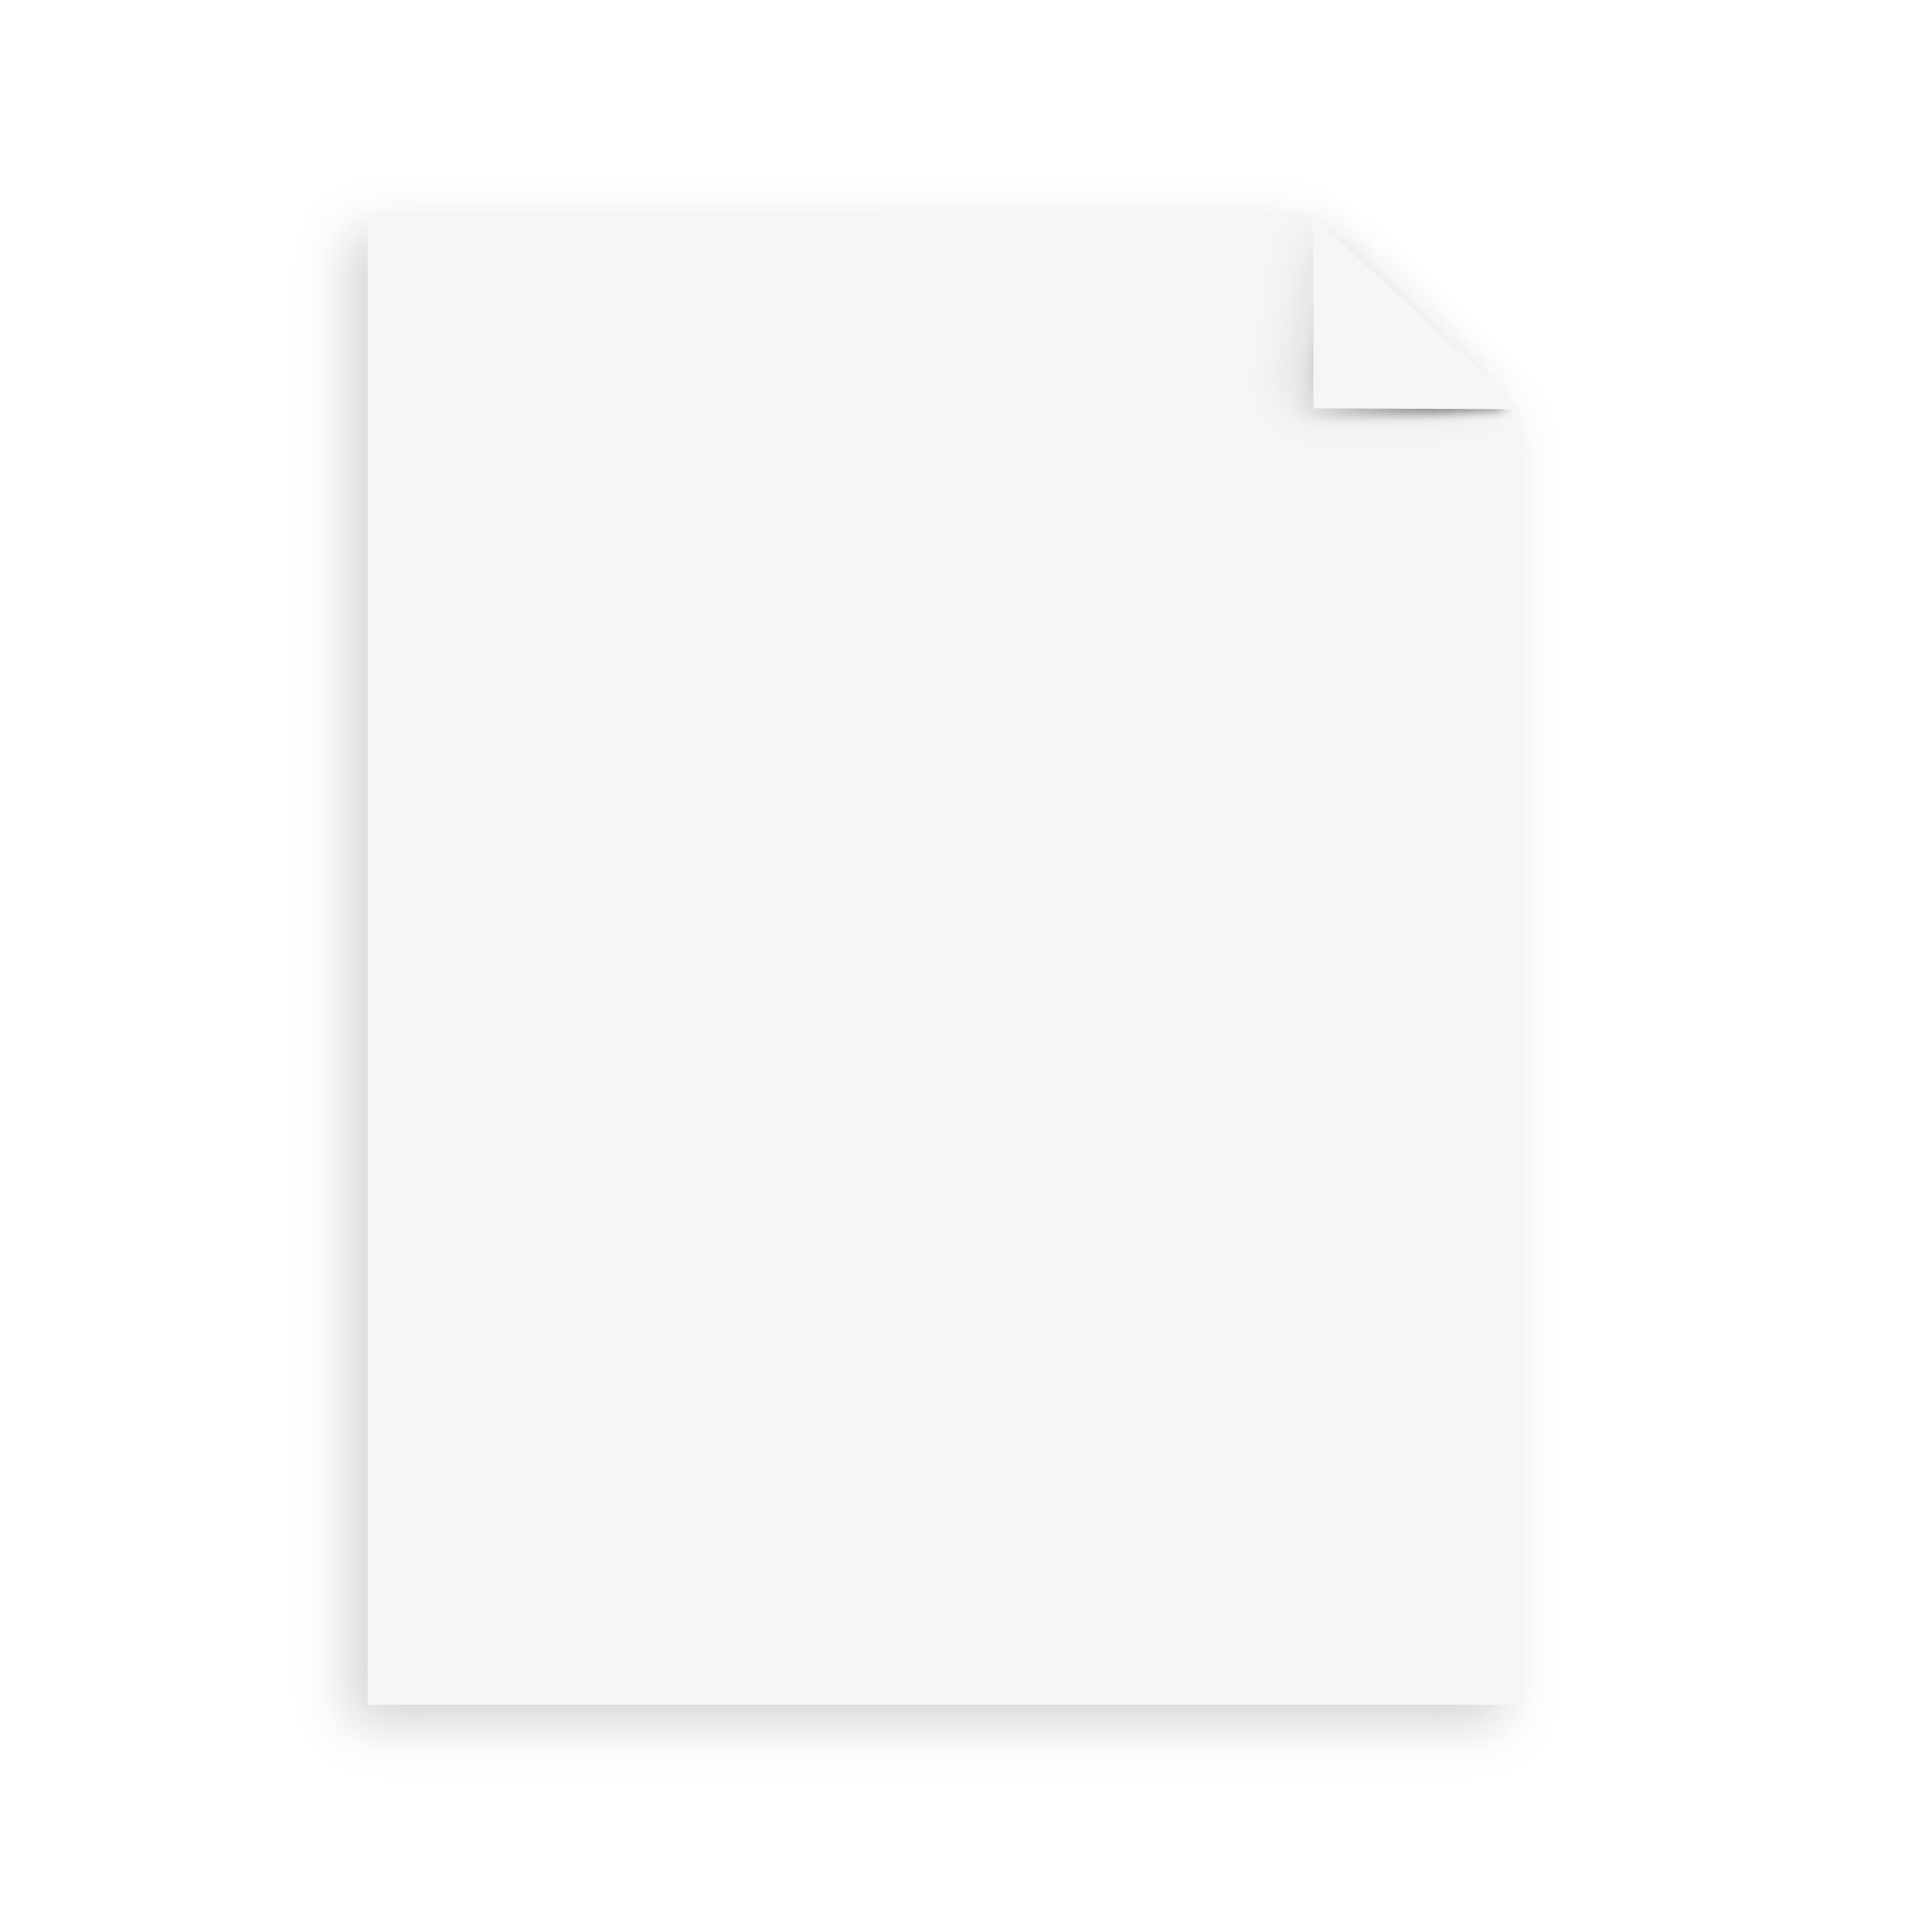 Neenah Bright White Cardstock - Letter - 8 1/2 x 11 - 65 lb Basis Weight  - Smooth - 100 / Pack - Acid-free, Lignin-free - Servmart